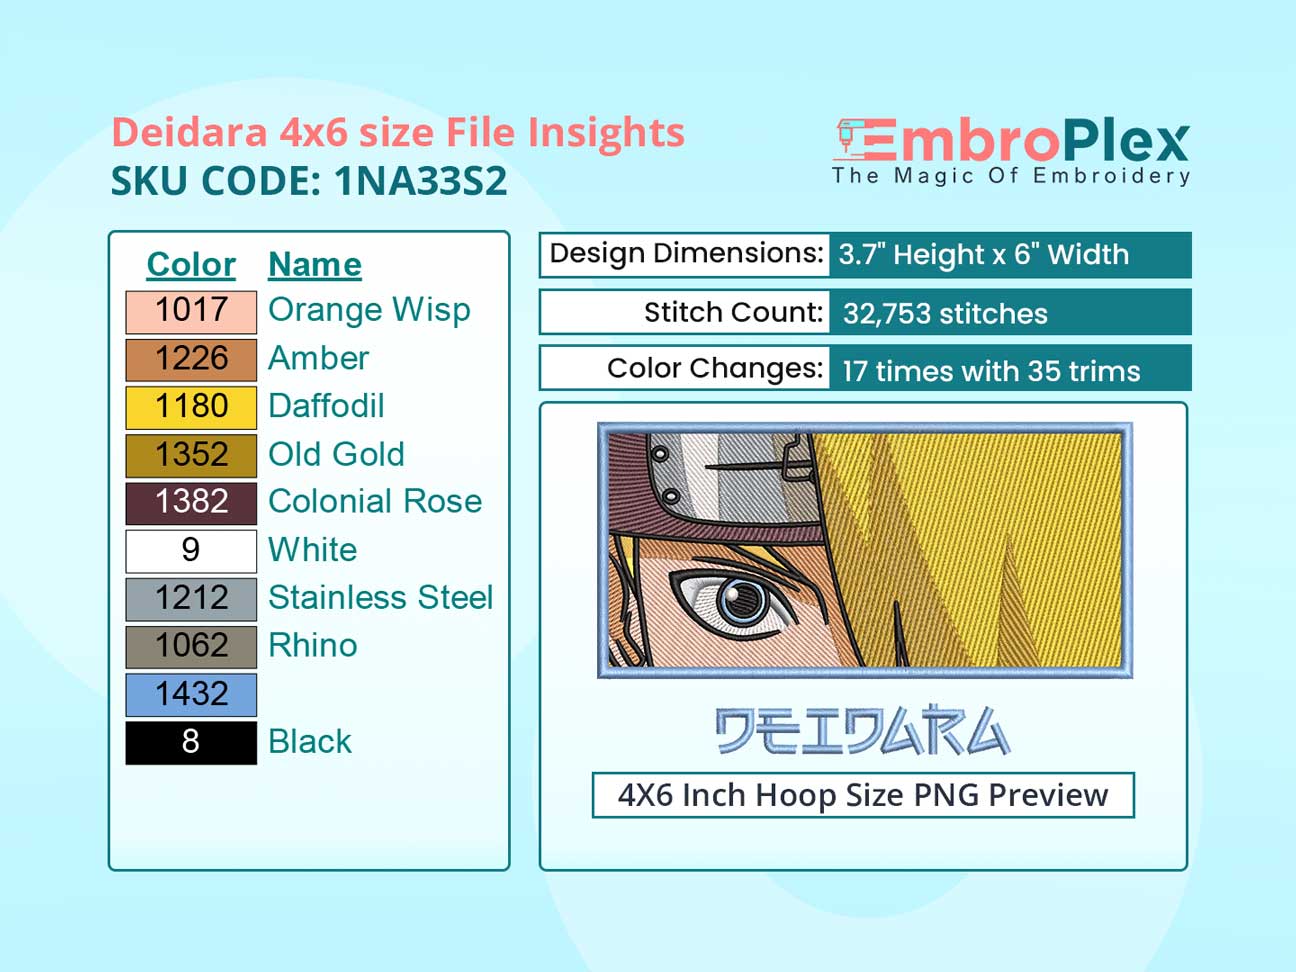 Anime-Inspired Deidara Embroidery Design File - 4x6 Inch hoop Size Variation overview image